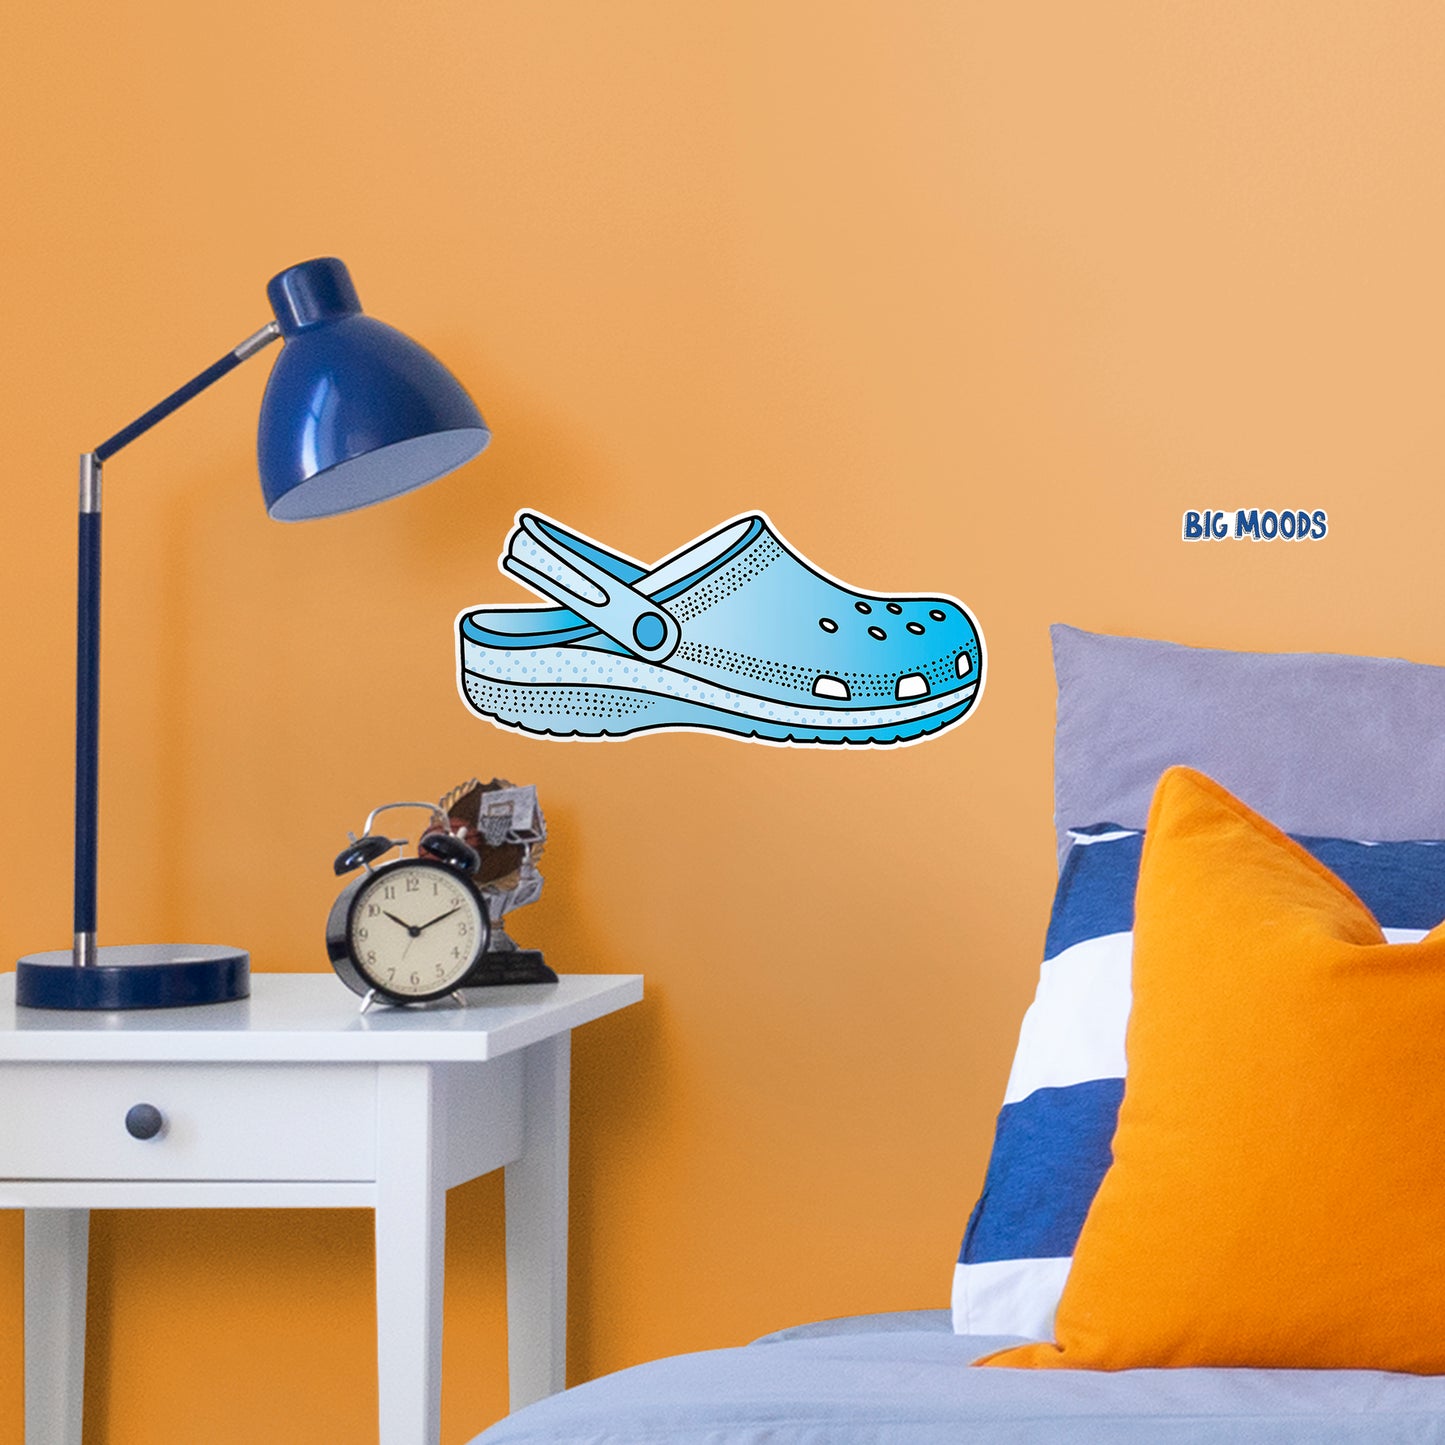 Slip On Sandal (Blue)        - Officially Licensed Big Moods Removable     Adhesive Decal